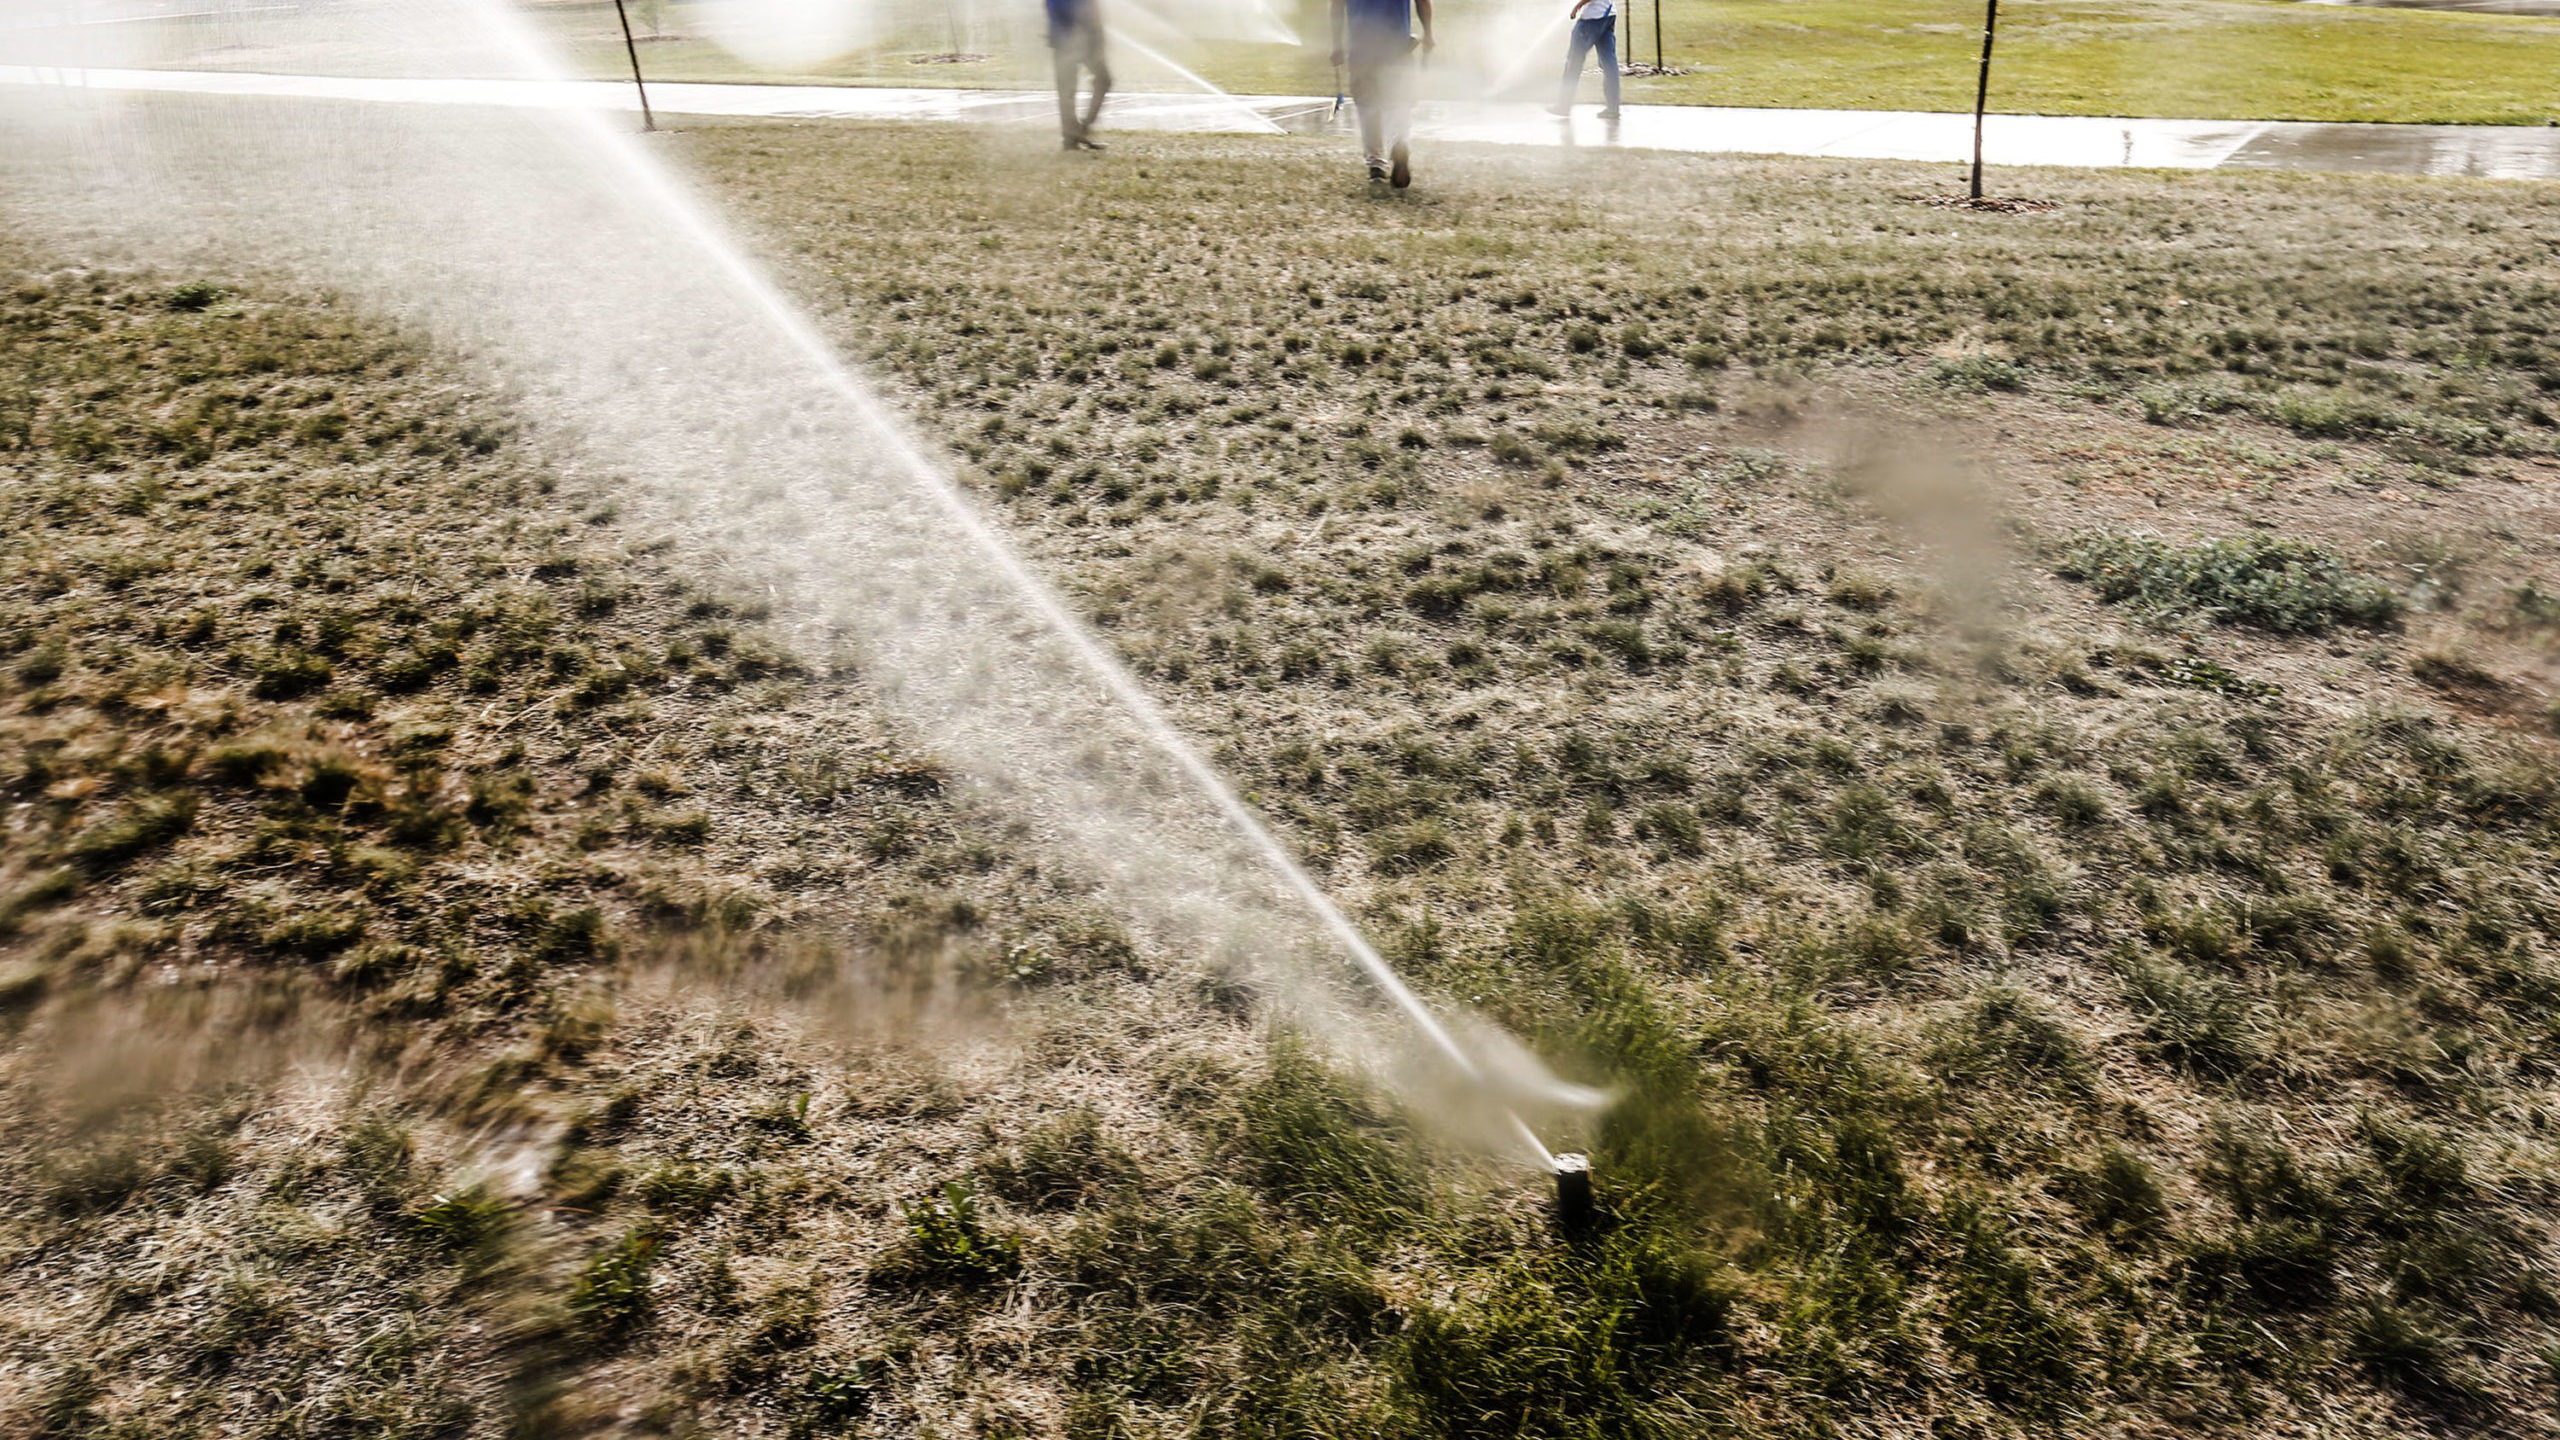 Sprinkler watering lawn pictured. Drought water conservation made improvements this year....